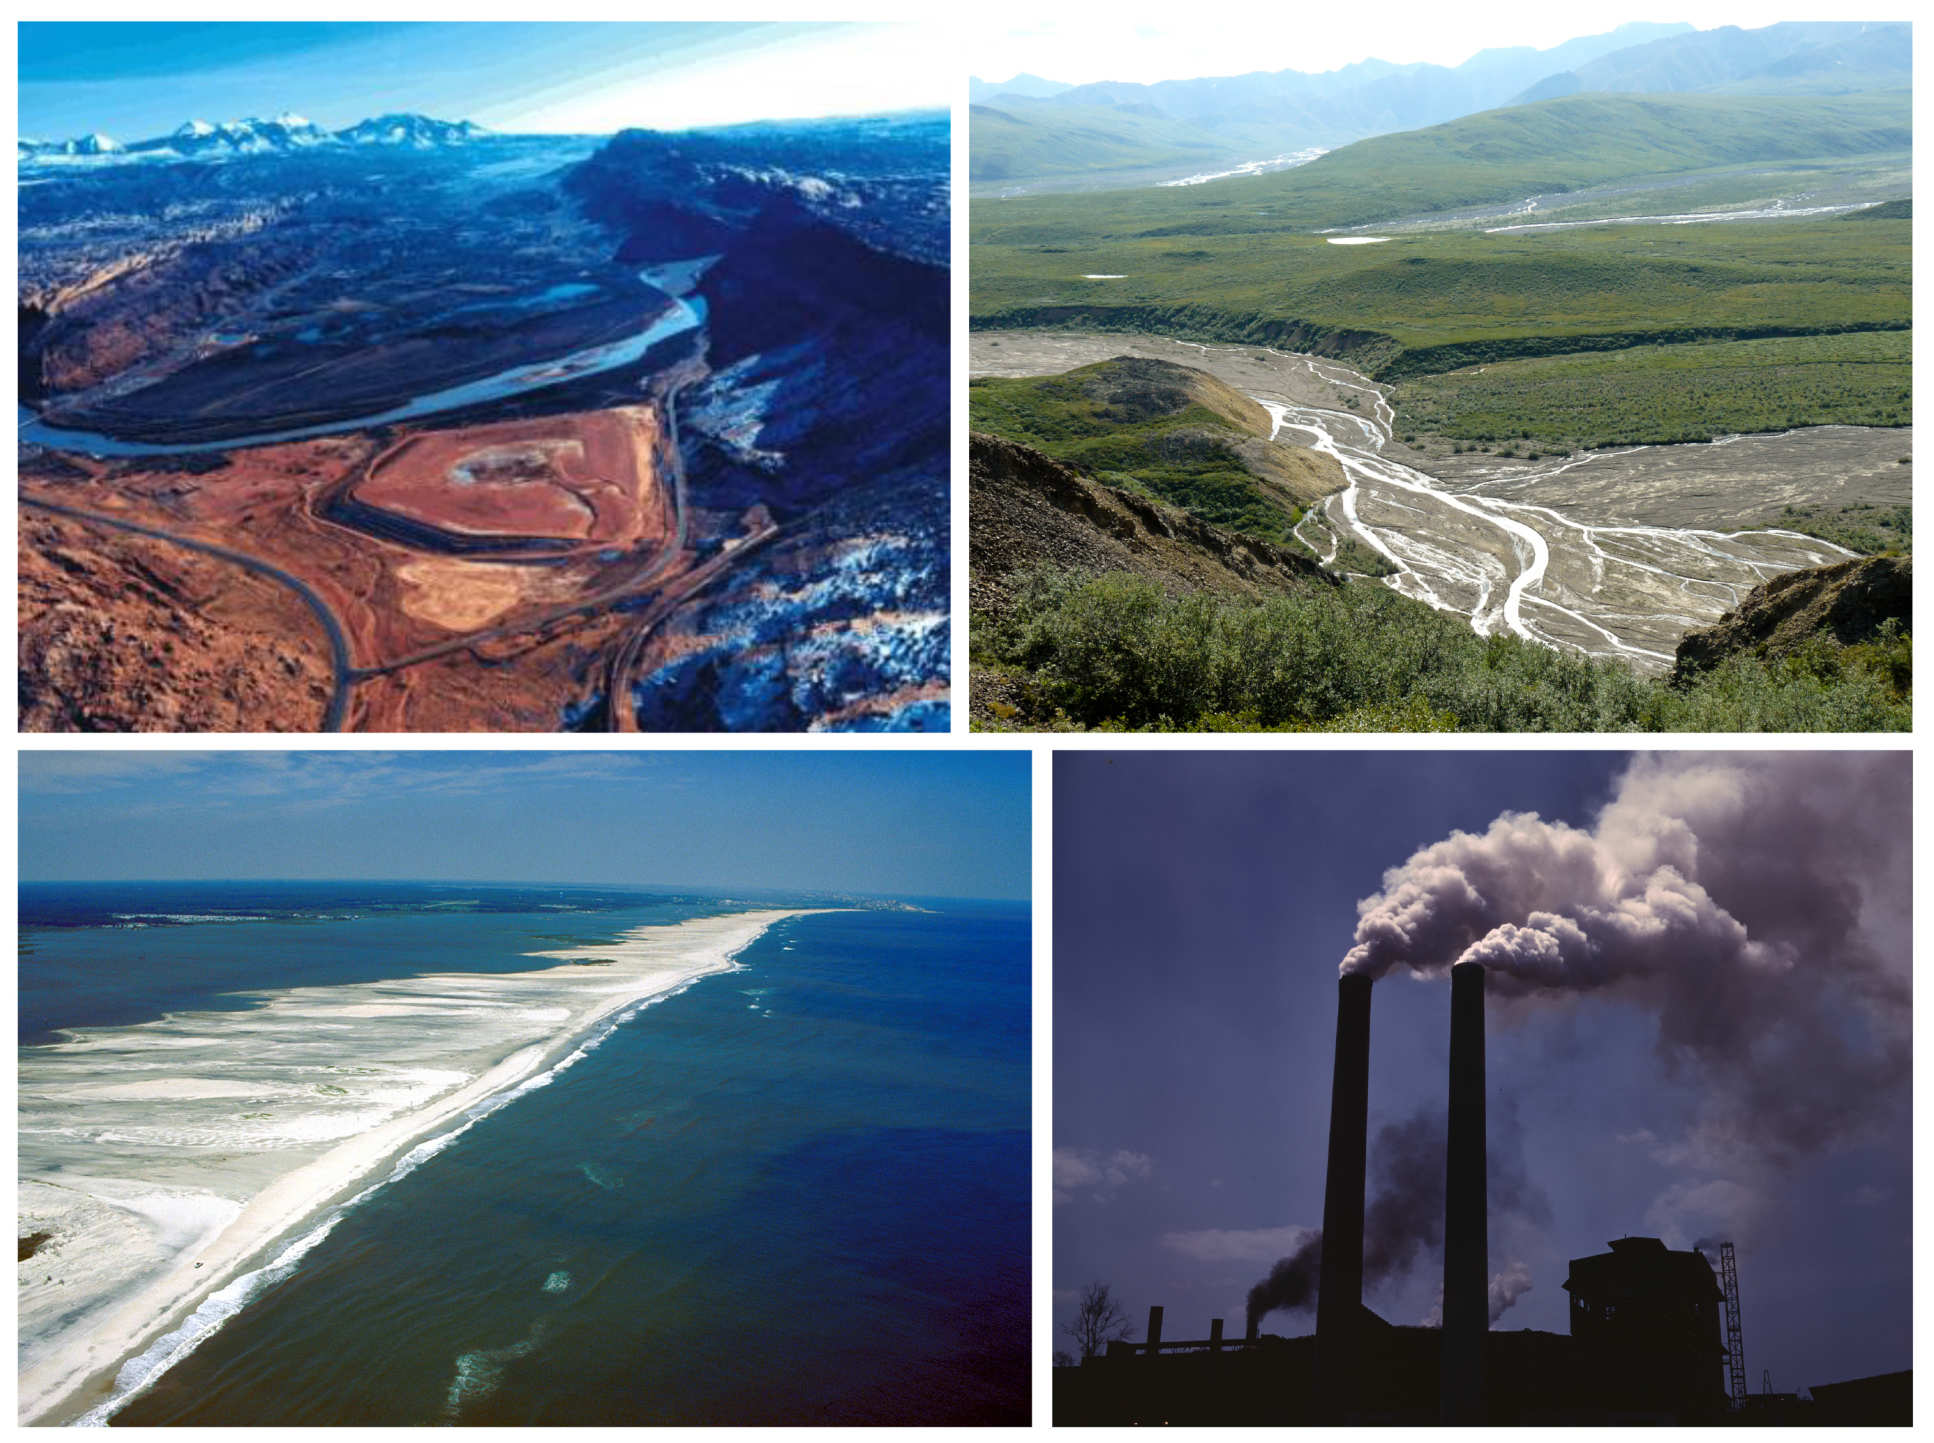 [Top left] View of the uranium mill tailings pile in Moab, Utah, [Top-right] Sediment transport within Toklat river, Alaska, USA,[ Bottom-left] Coastal sediment transport at Assateague Island, Maryland, USA, [Bottom-right] Air pollution from fossil-fuel power station